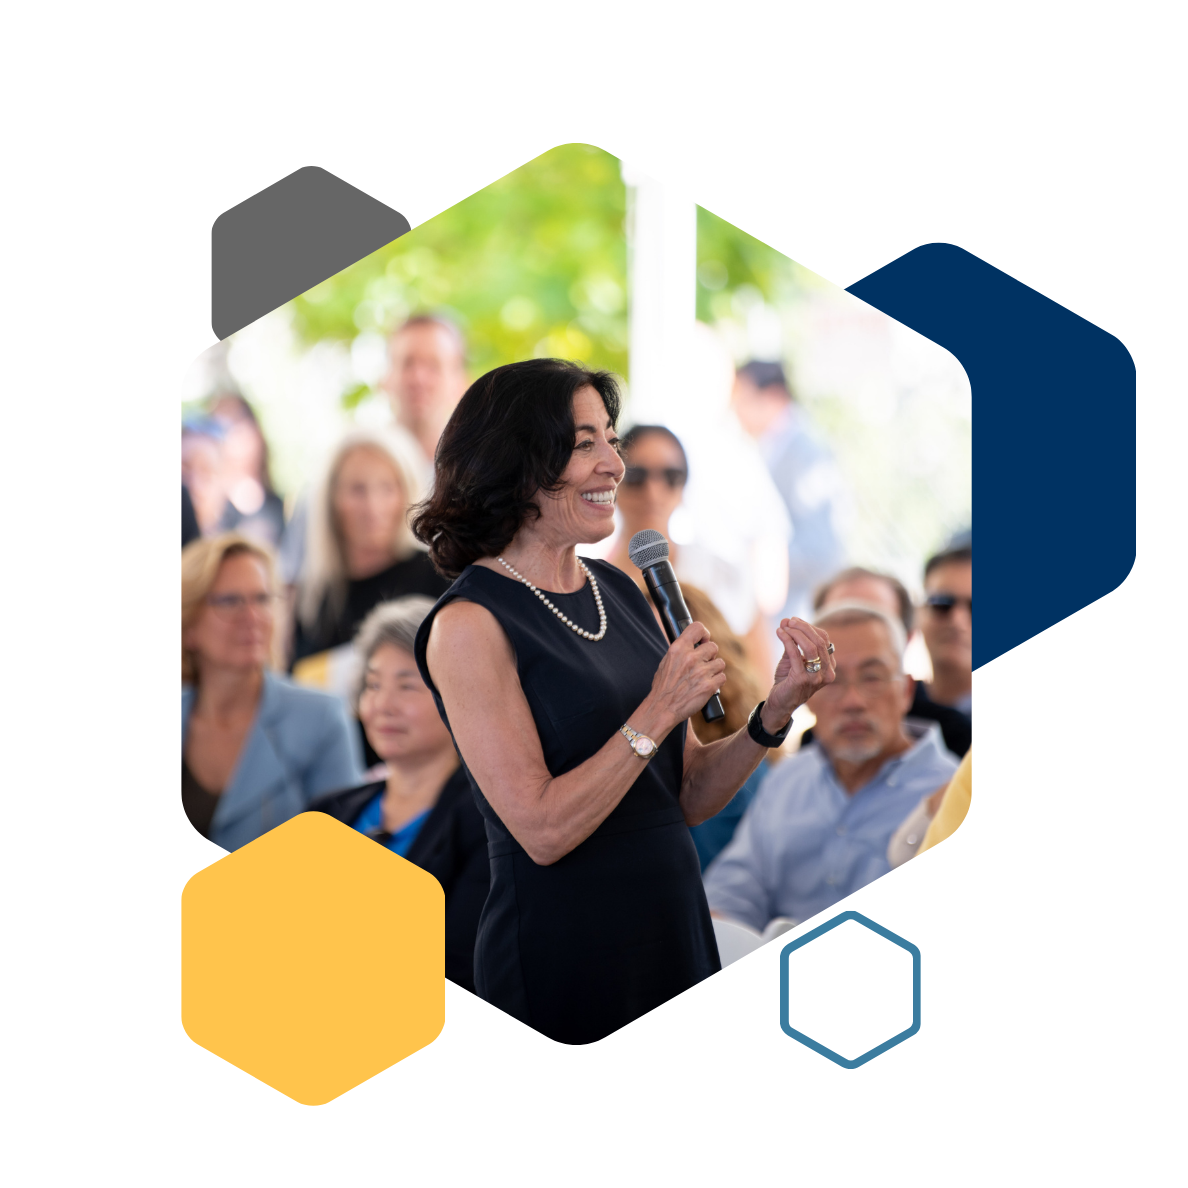 Jennifer Chayes leading an event, blue, yellow, and gray tessellation 